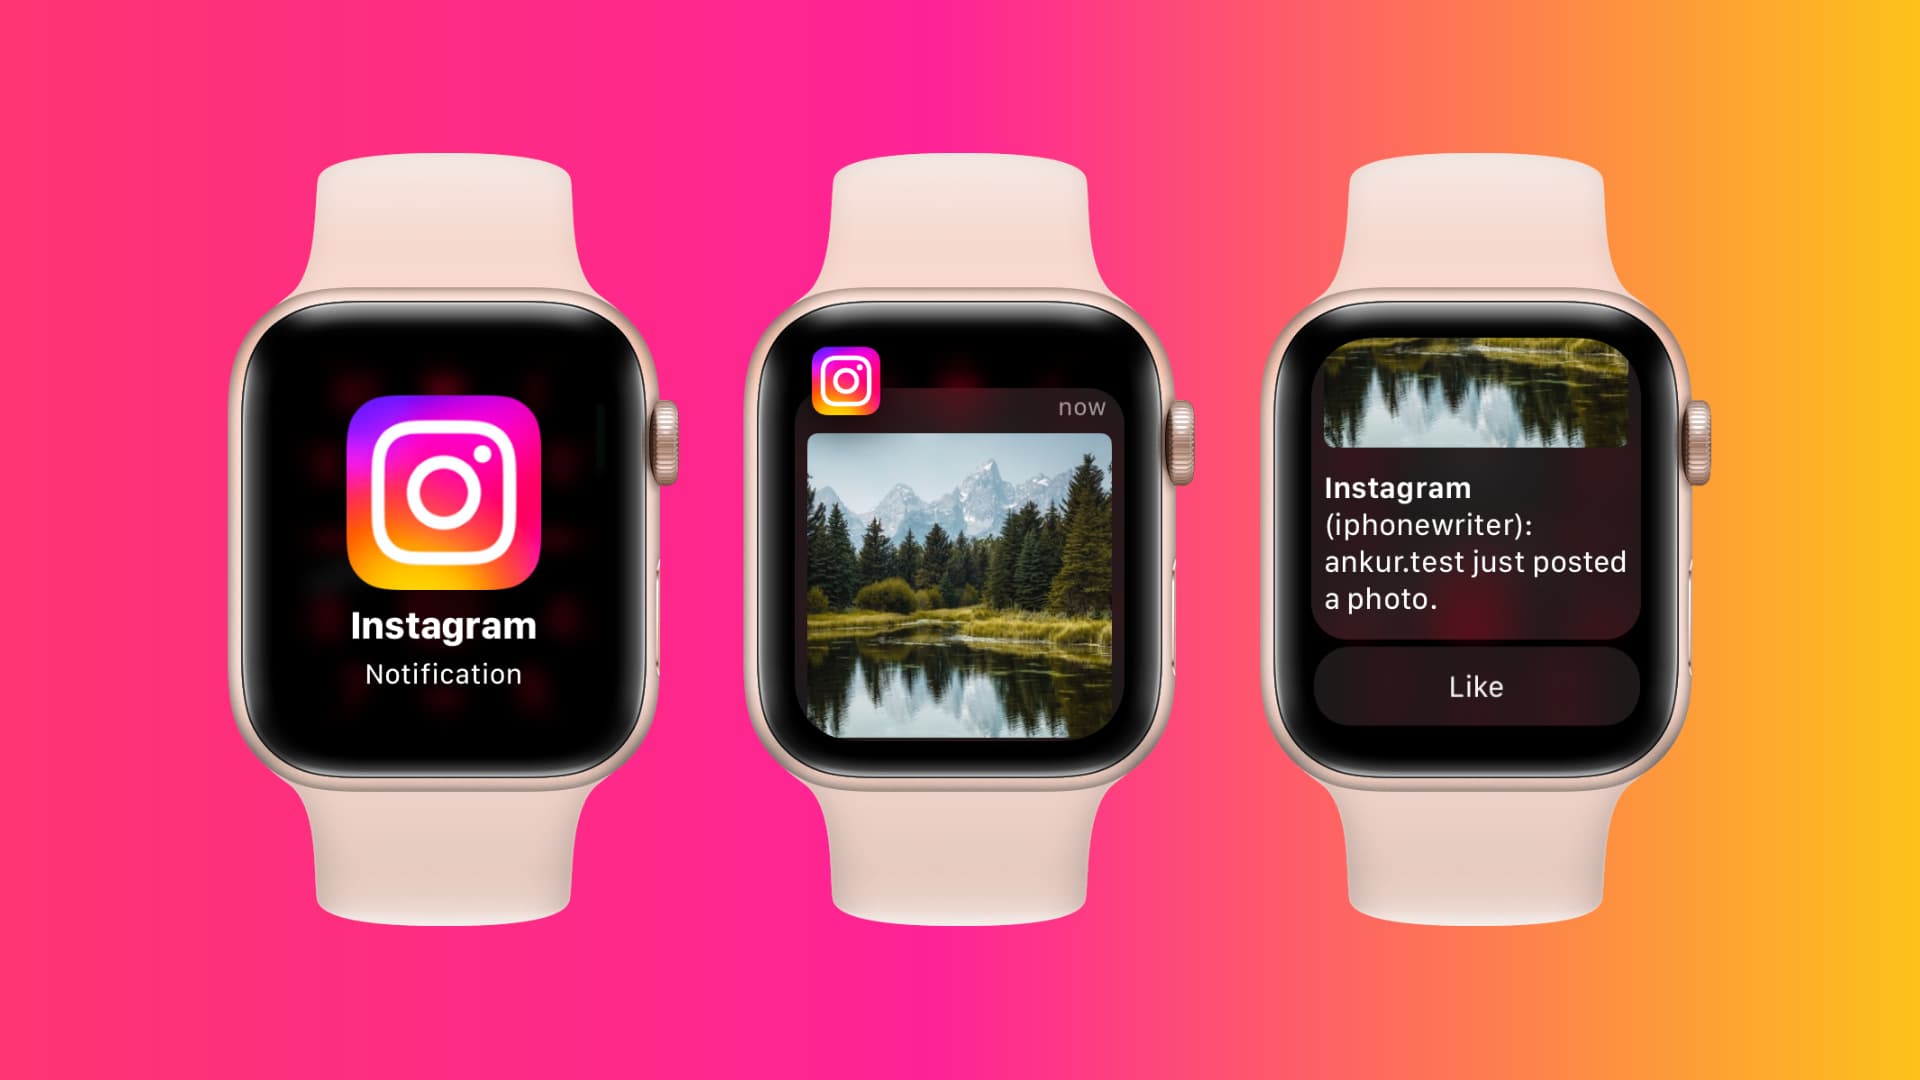 Three Apple Watch mockups showing an Instagram notification for a new post on the watch screen